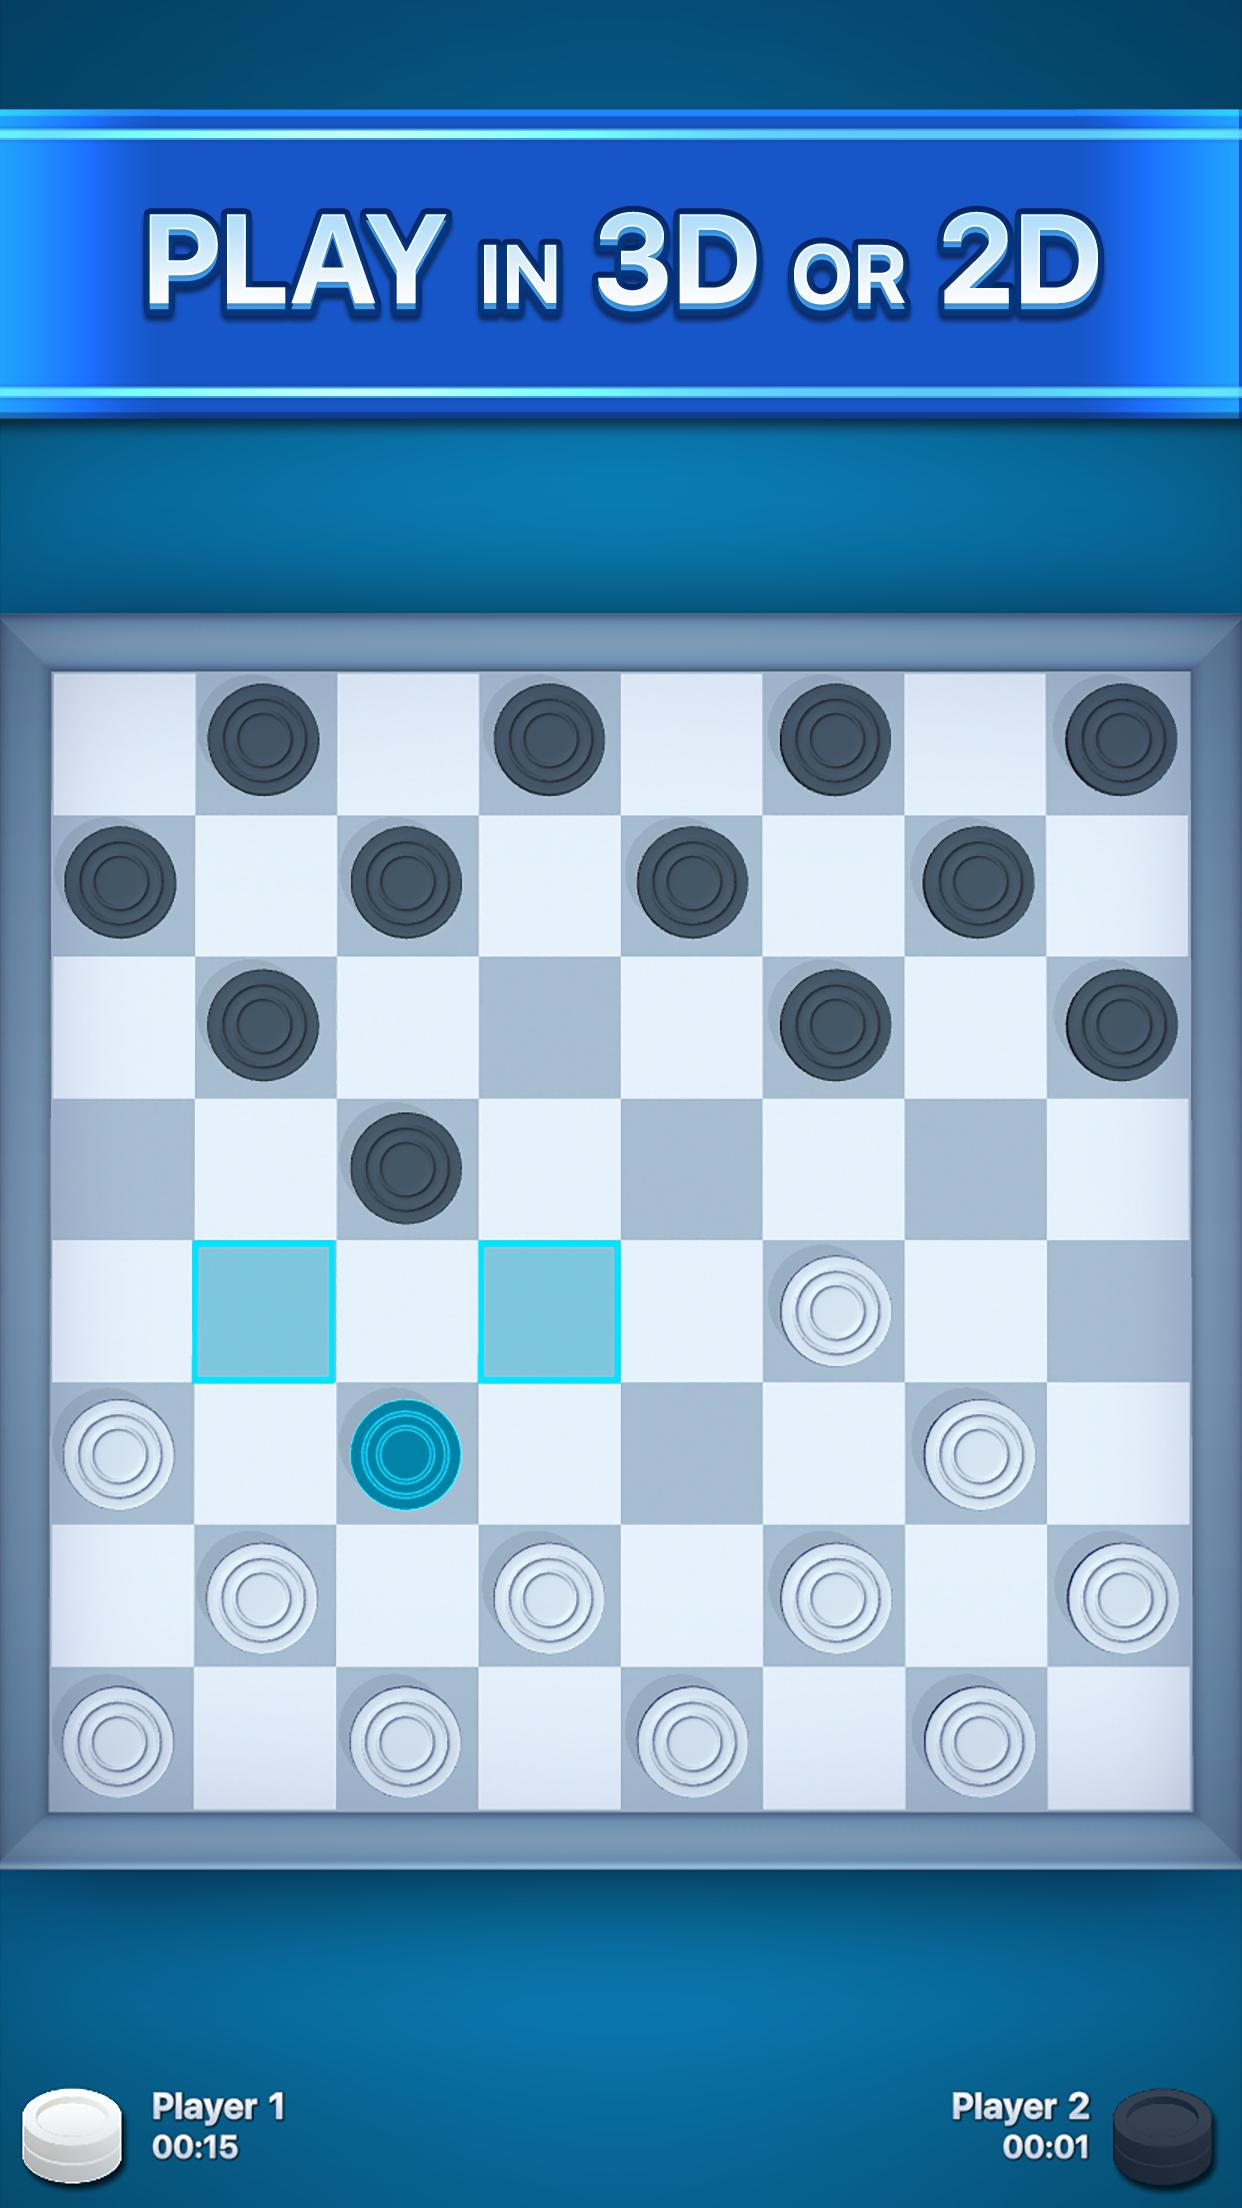 Checkers download. Checkers. Checker 3d. Checkers game 1988. The Queen of Checkers.